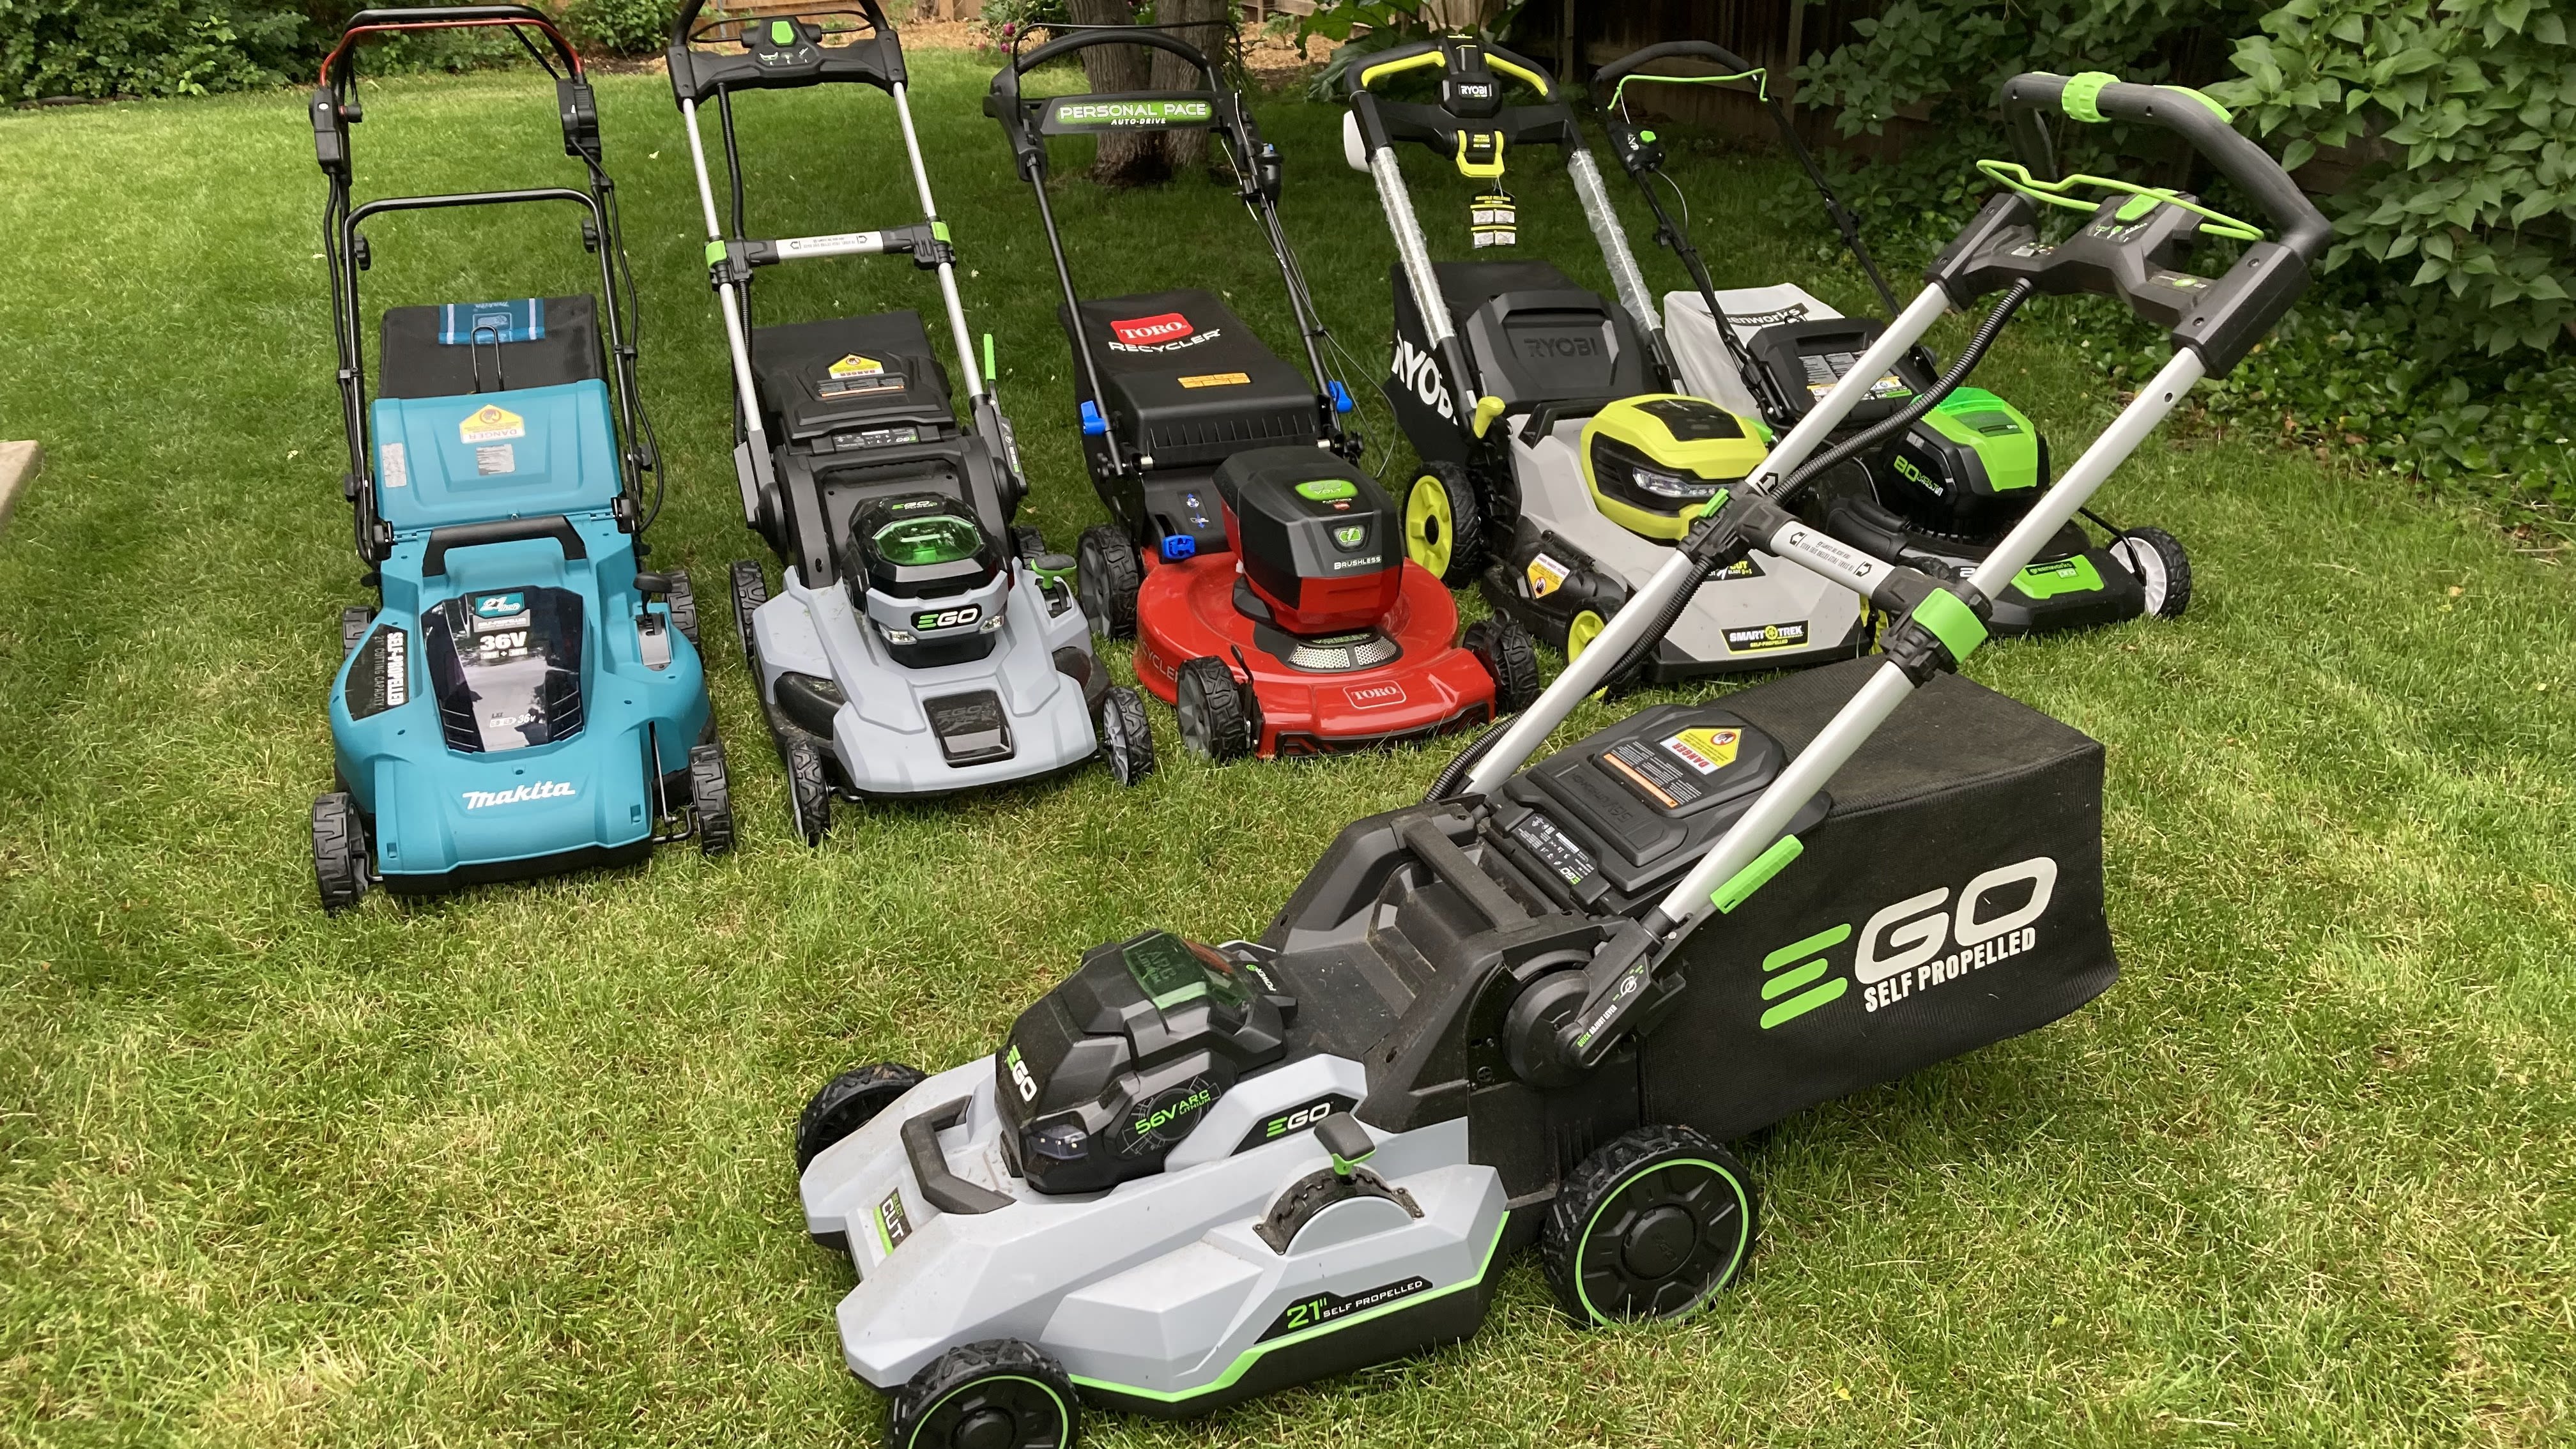 21 Self-Propelled Cordless Lawn Mower by EGO POWER+